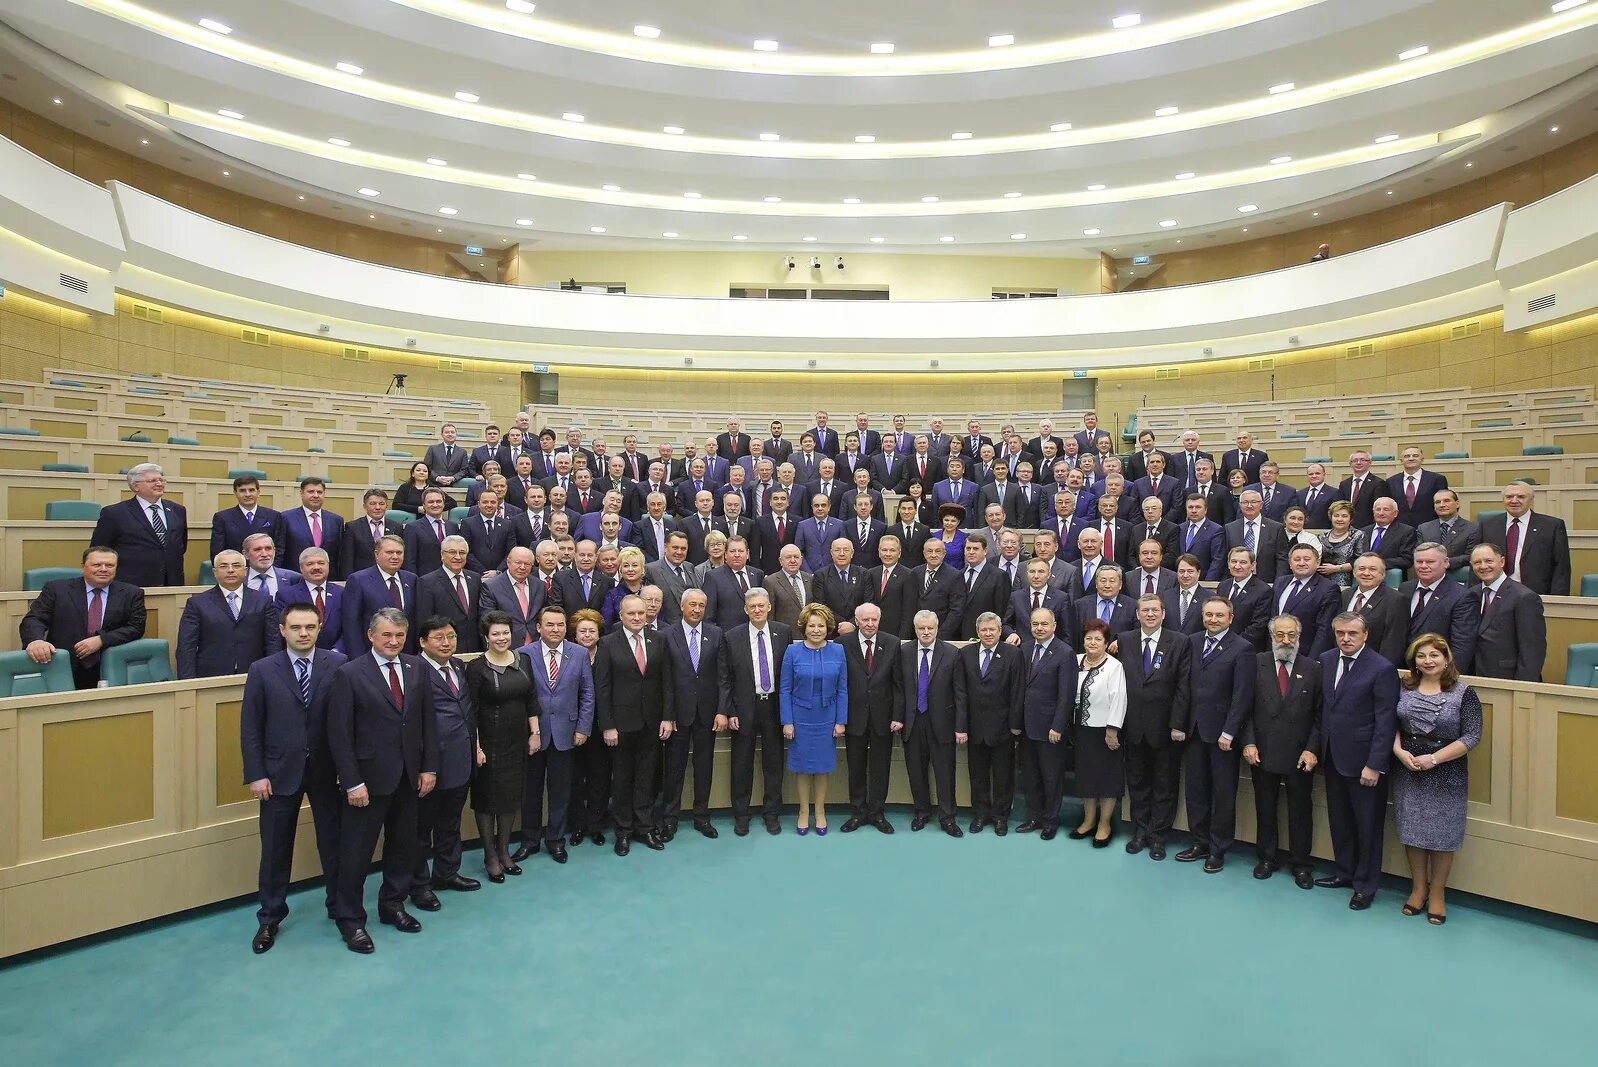 Federal assembly of russia